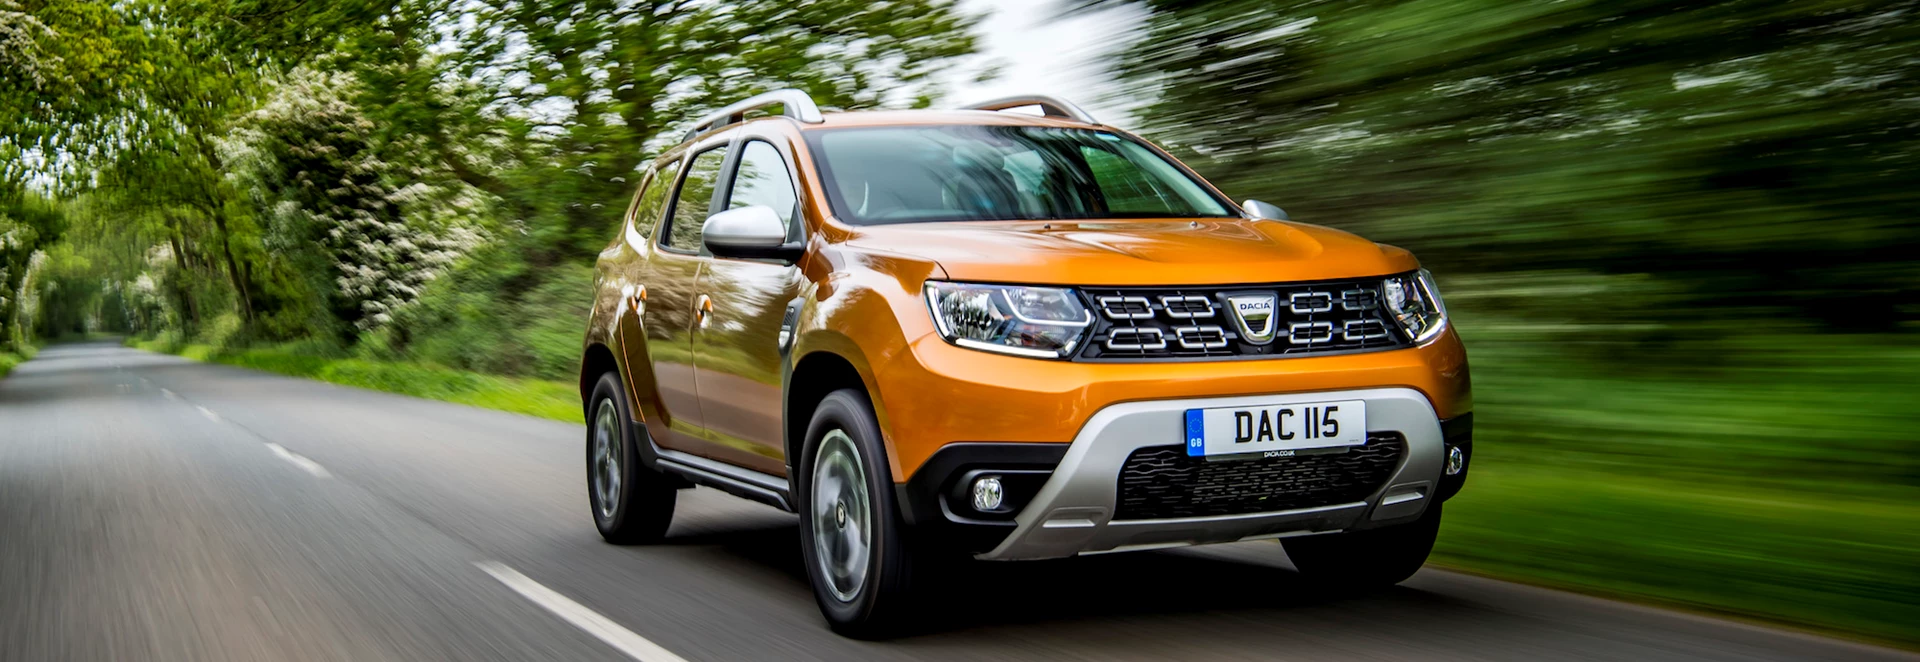 2018 Dacia Duster still great value and here's why